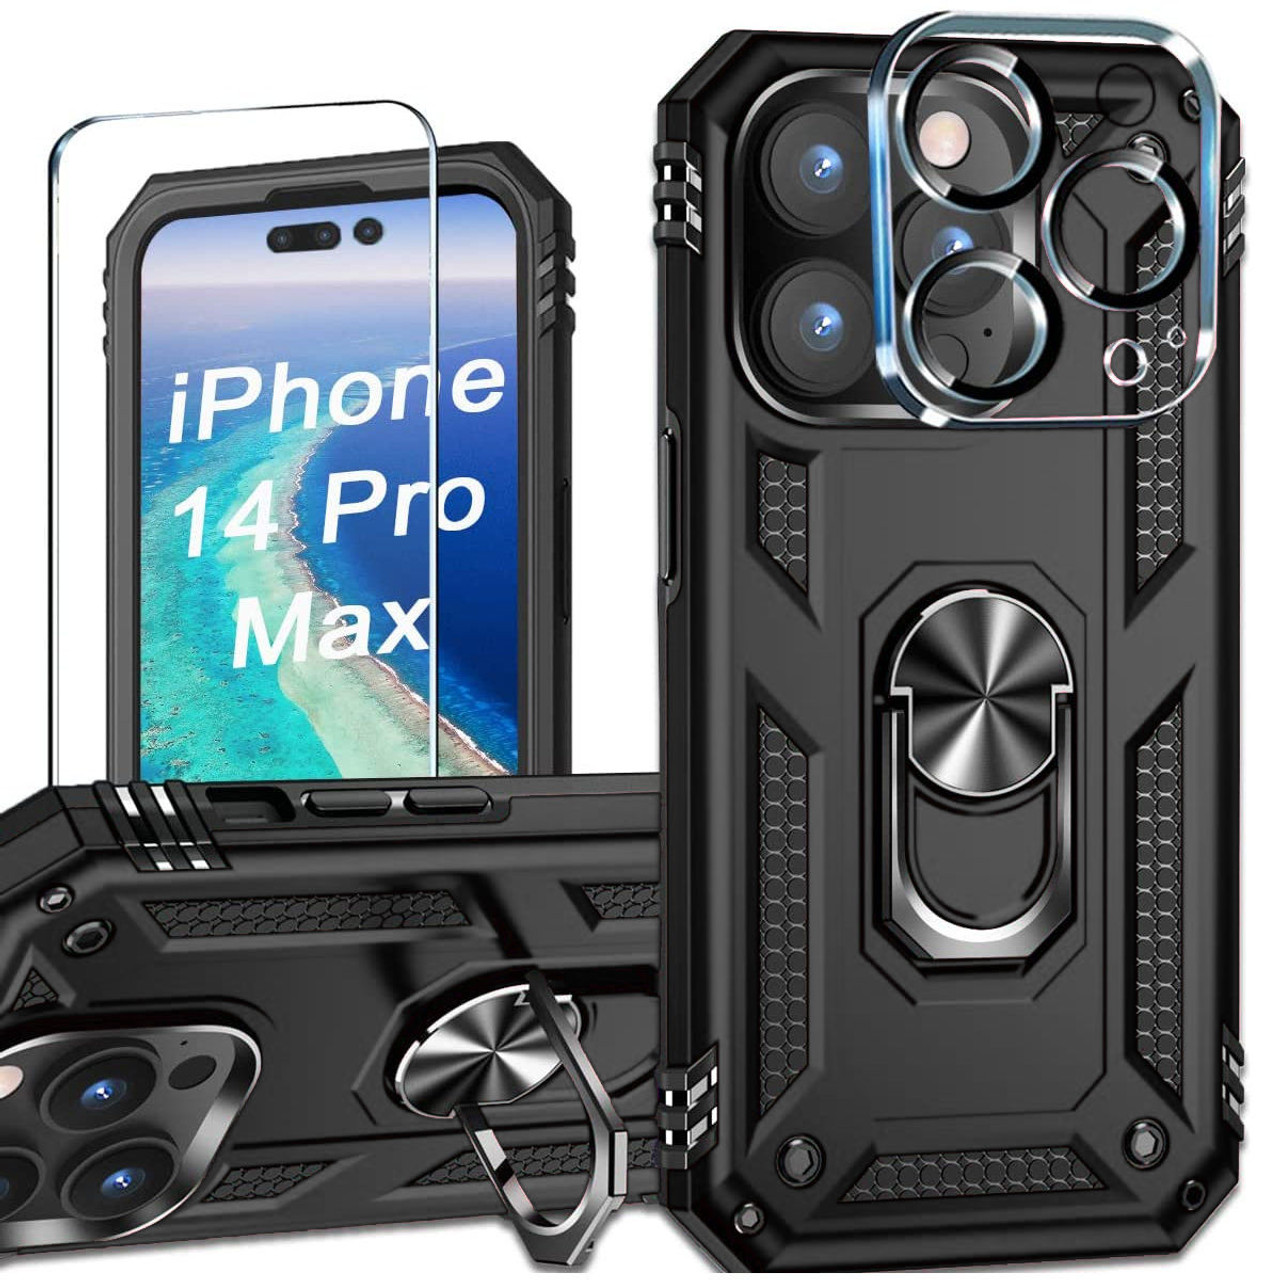 Buy Apple iPhone 14 Pro Max, iPhone 14 Pro Camera Lens Protector - Black